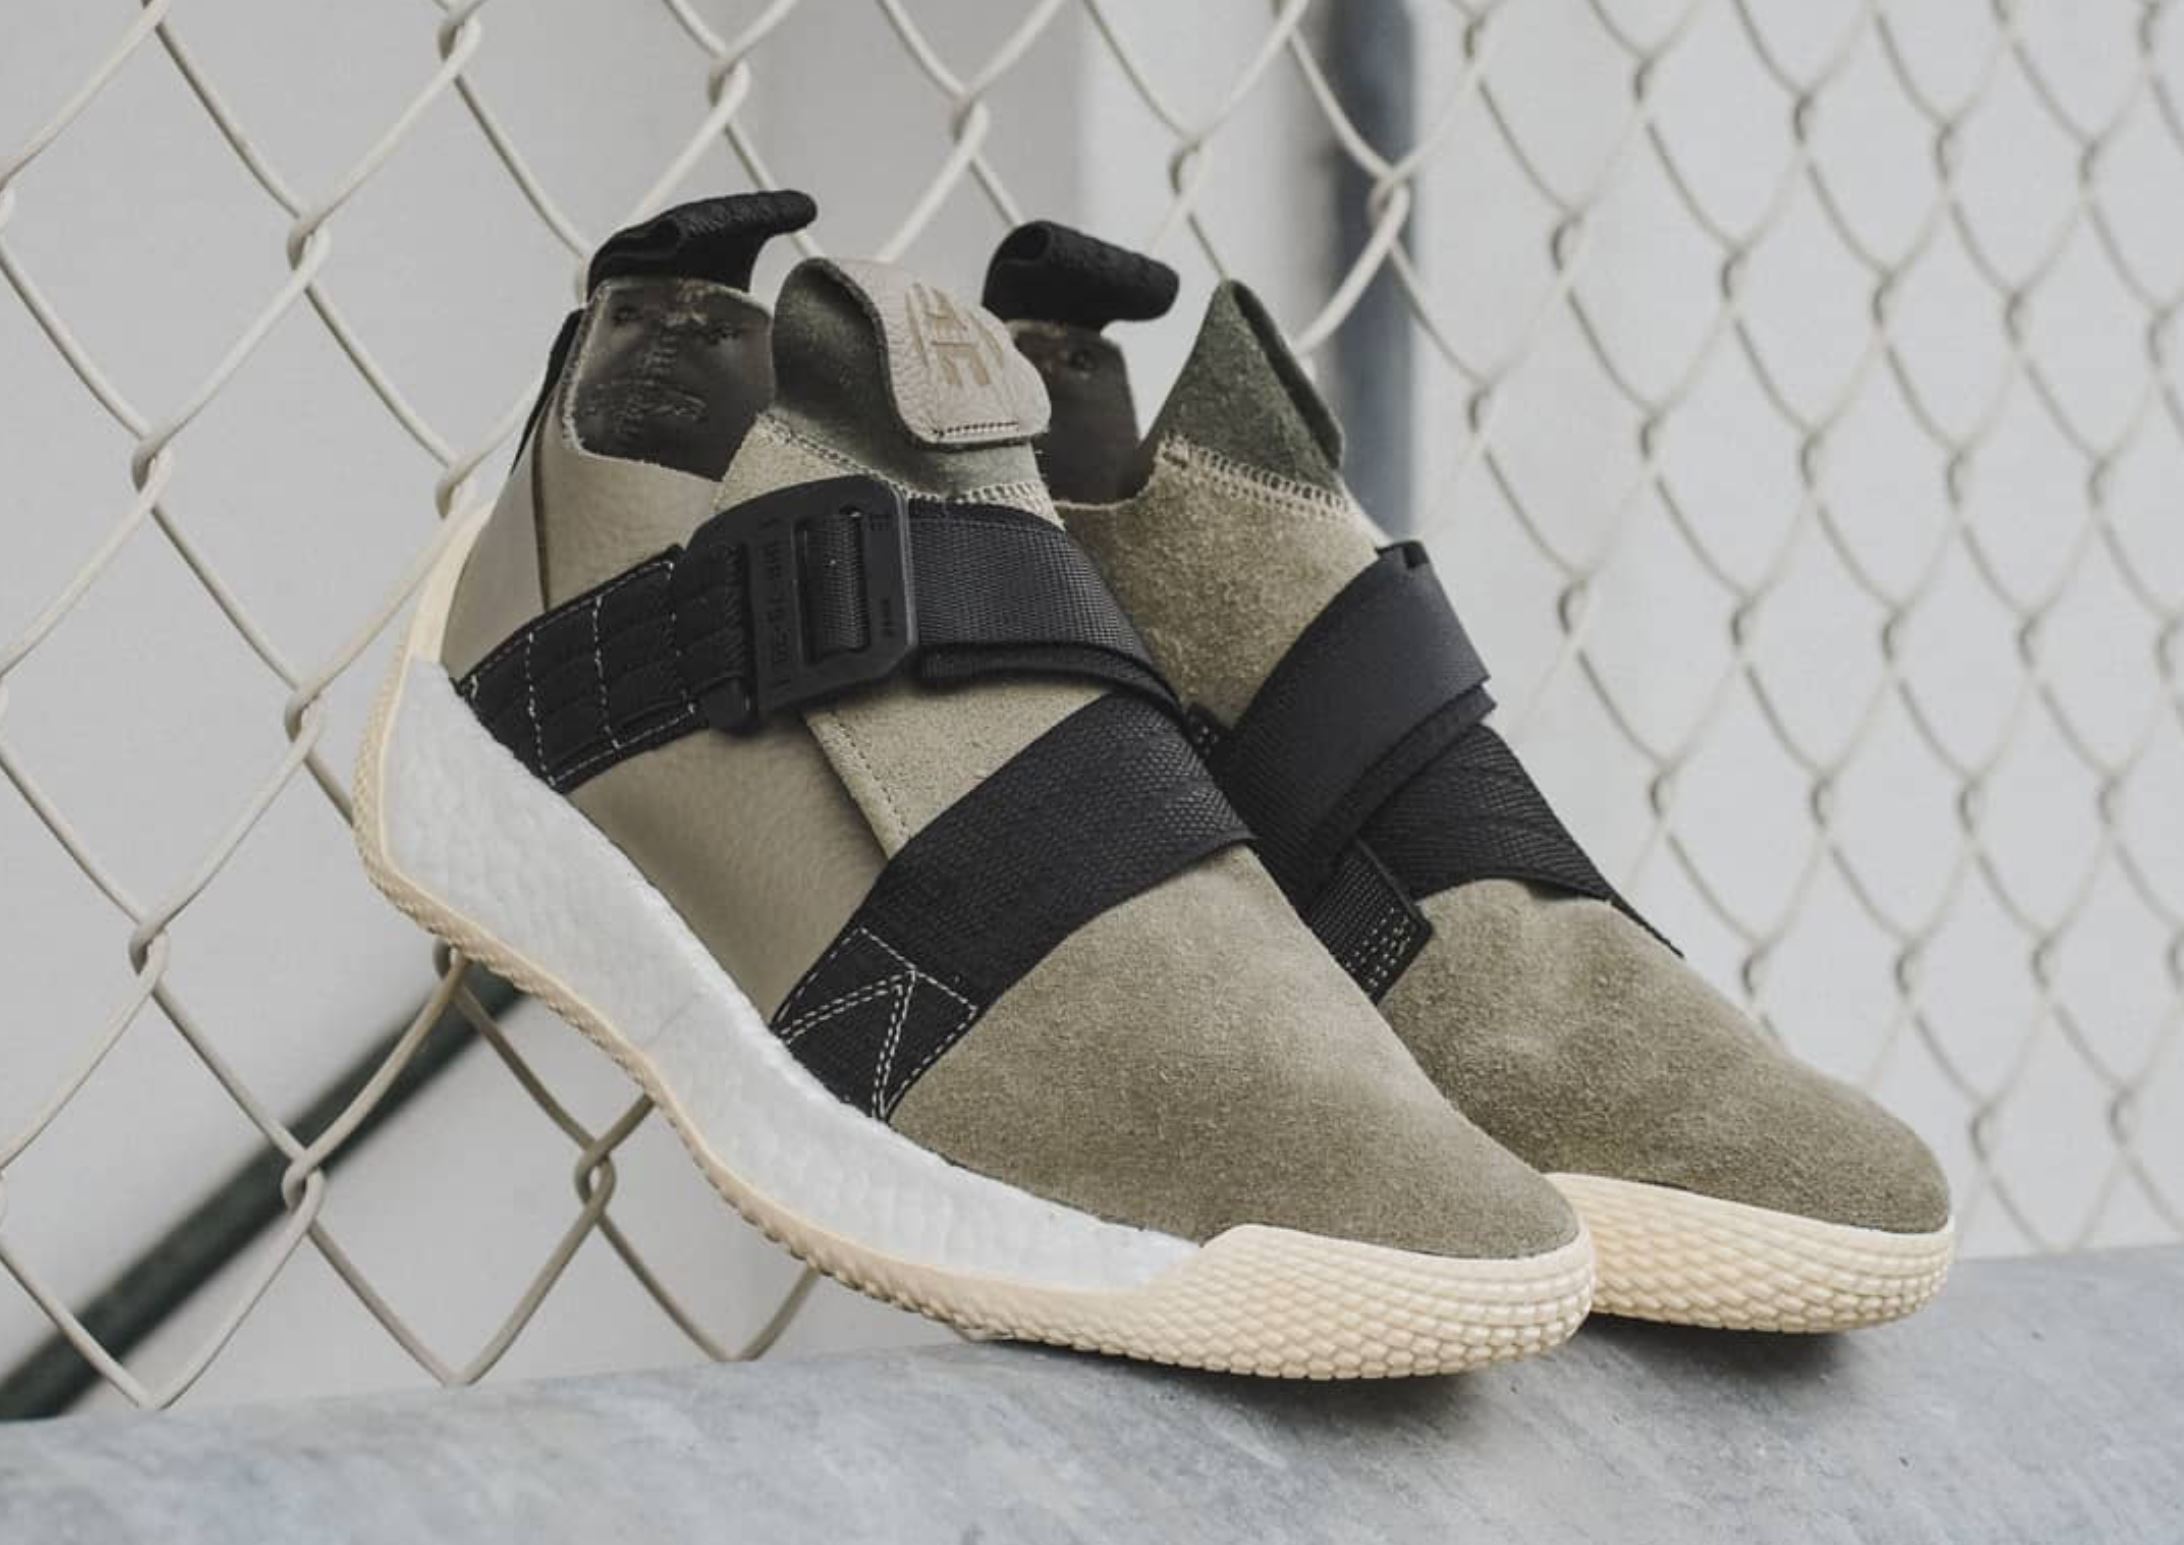 The adidas Harden LS 2 Buckle is 